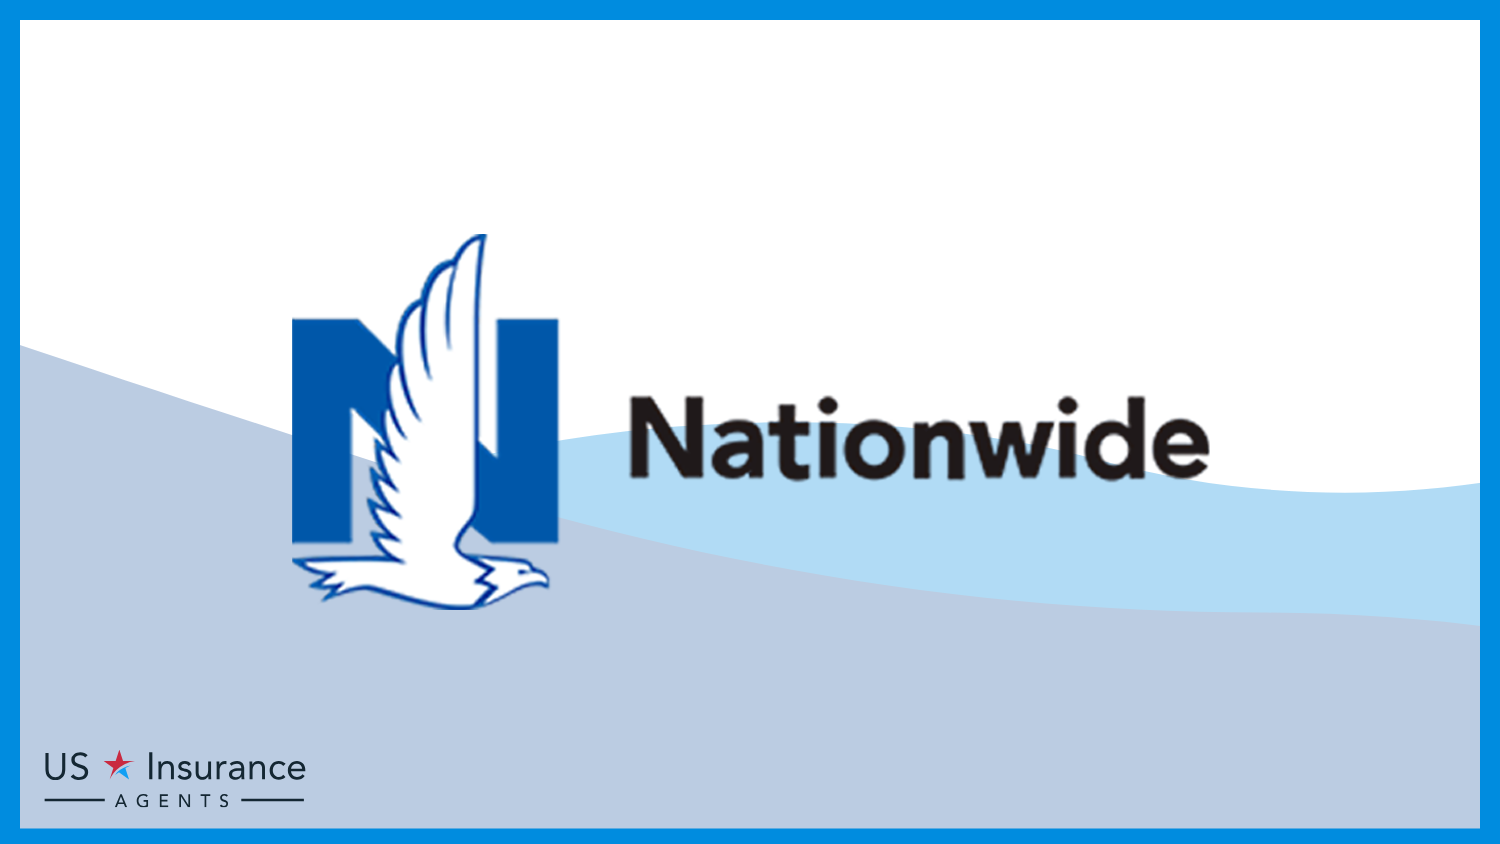 Nationwide: Best Car Insurance for Healthcare Professionals